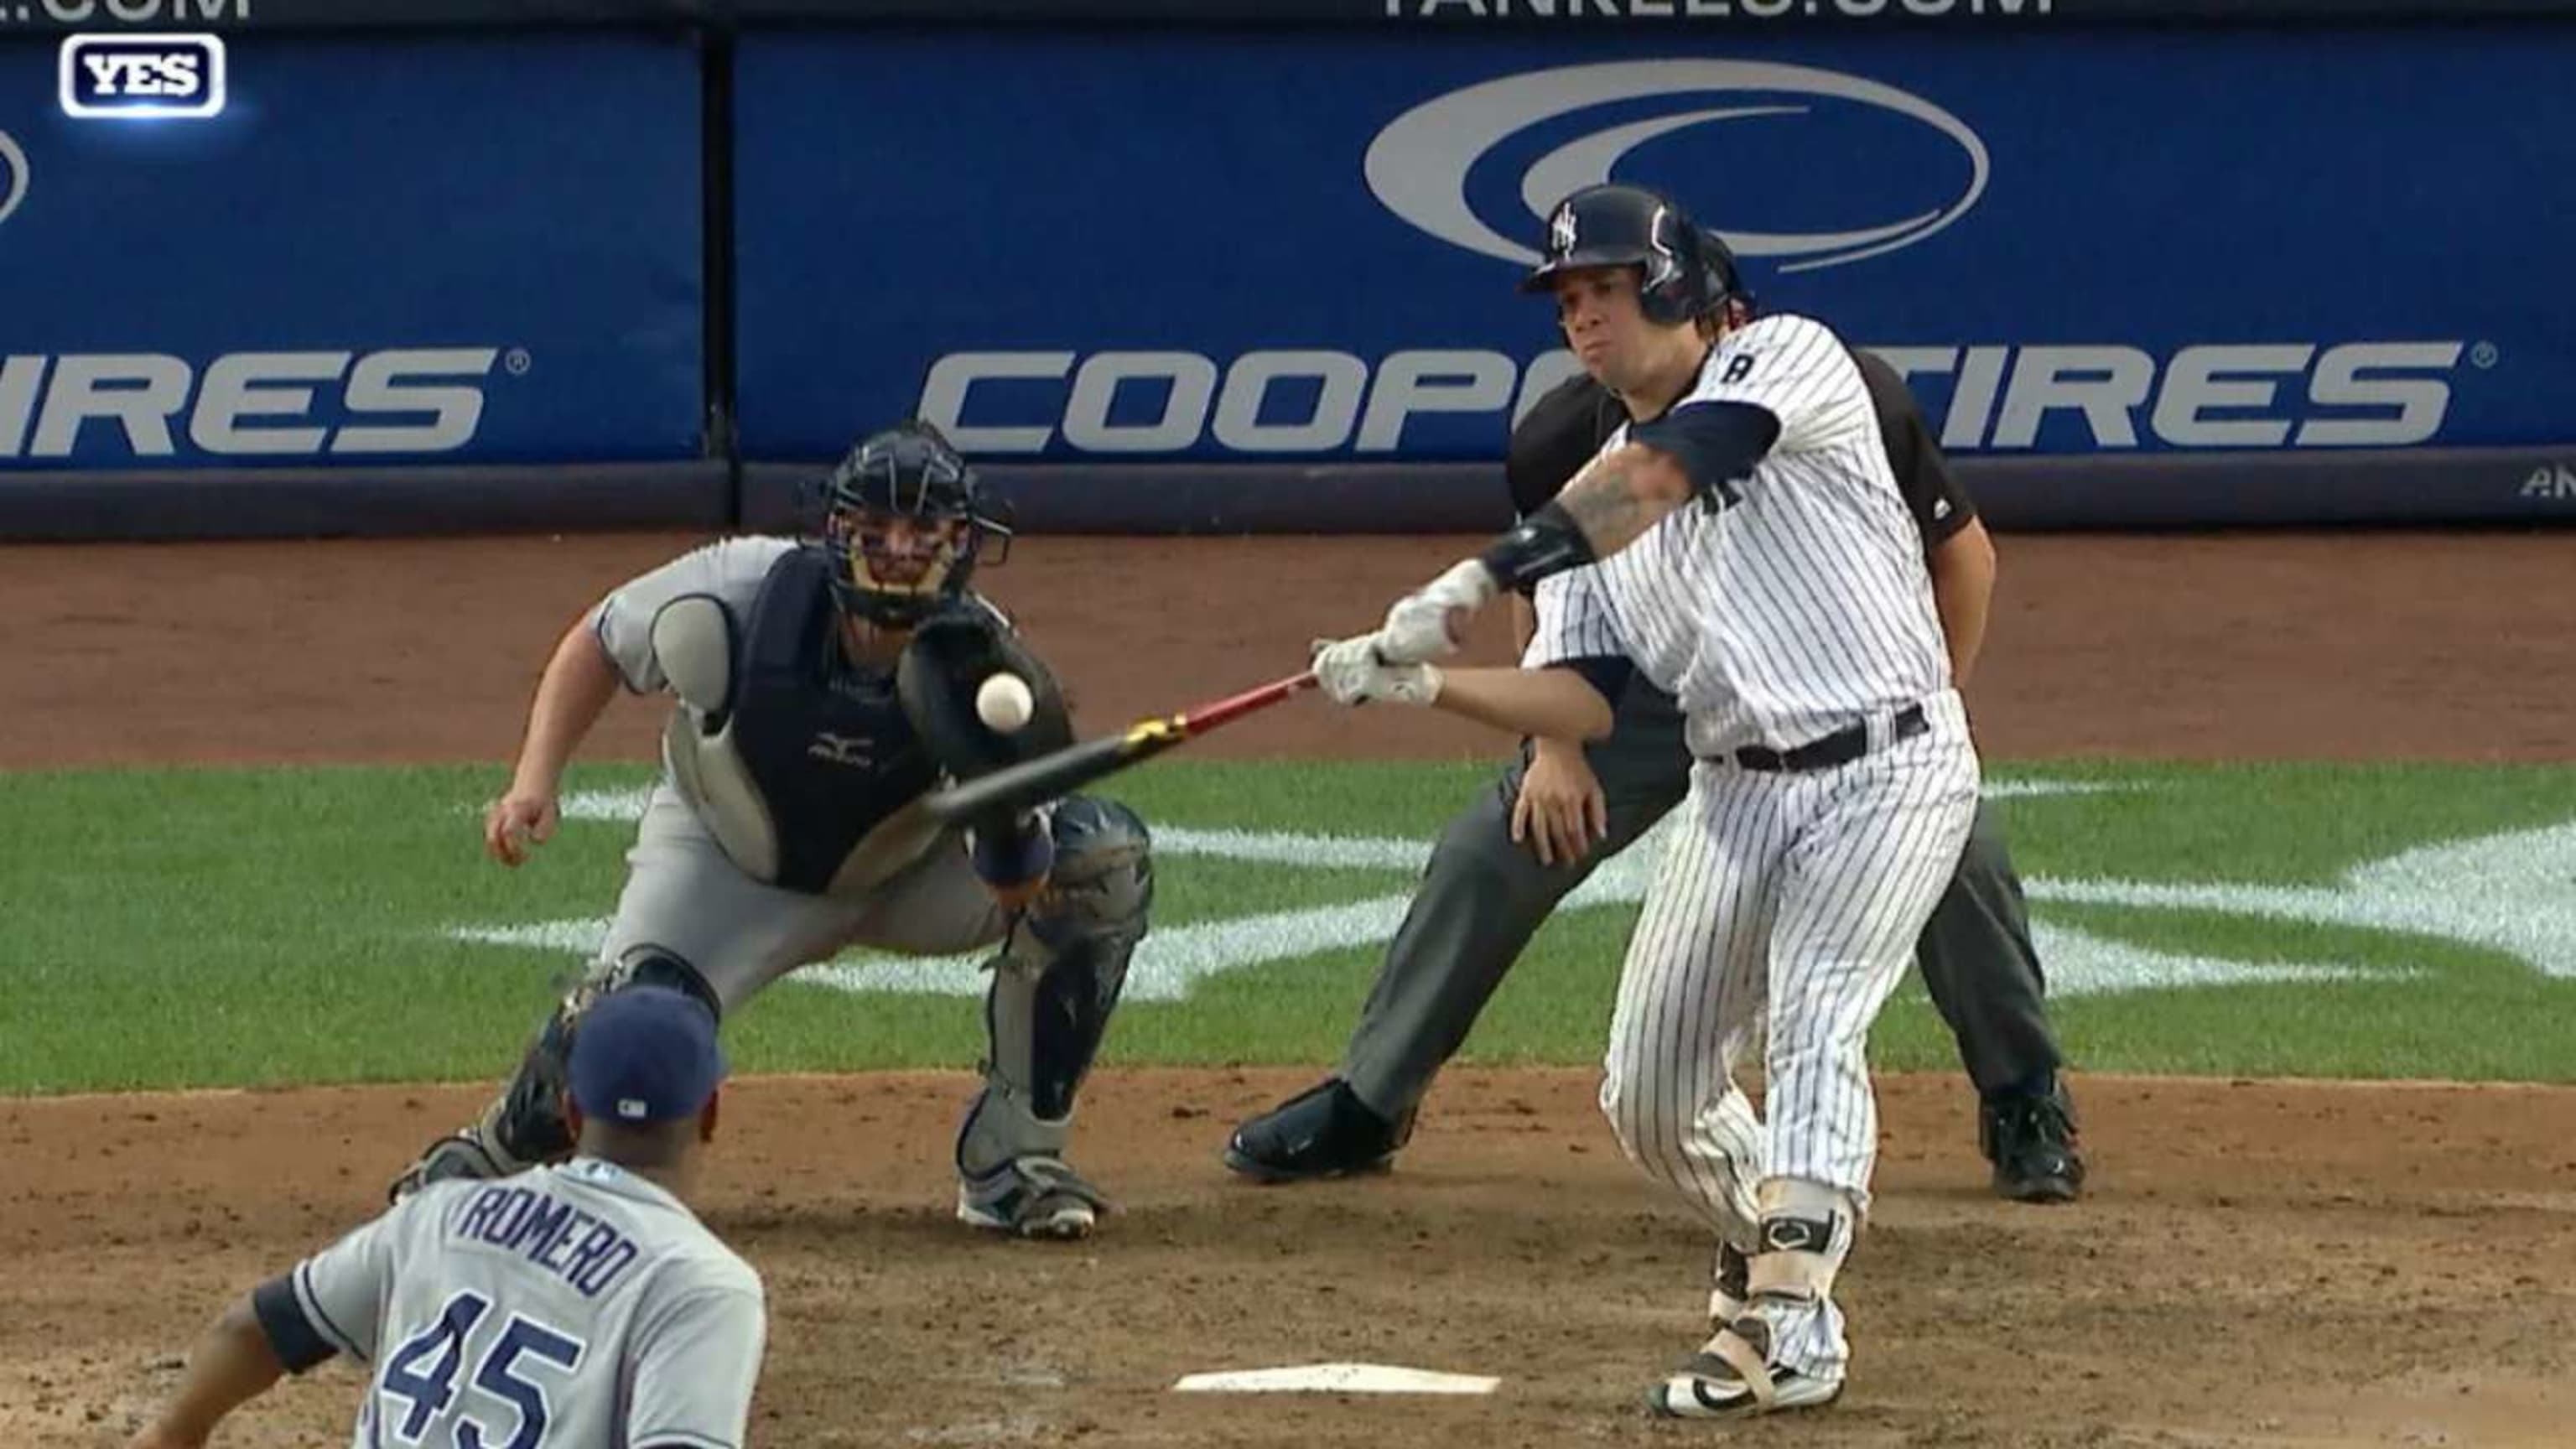 VIDEO: Breakdown of How Gary Sanchez Changed Catching Stance to Steal More  Strikes is Incredible